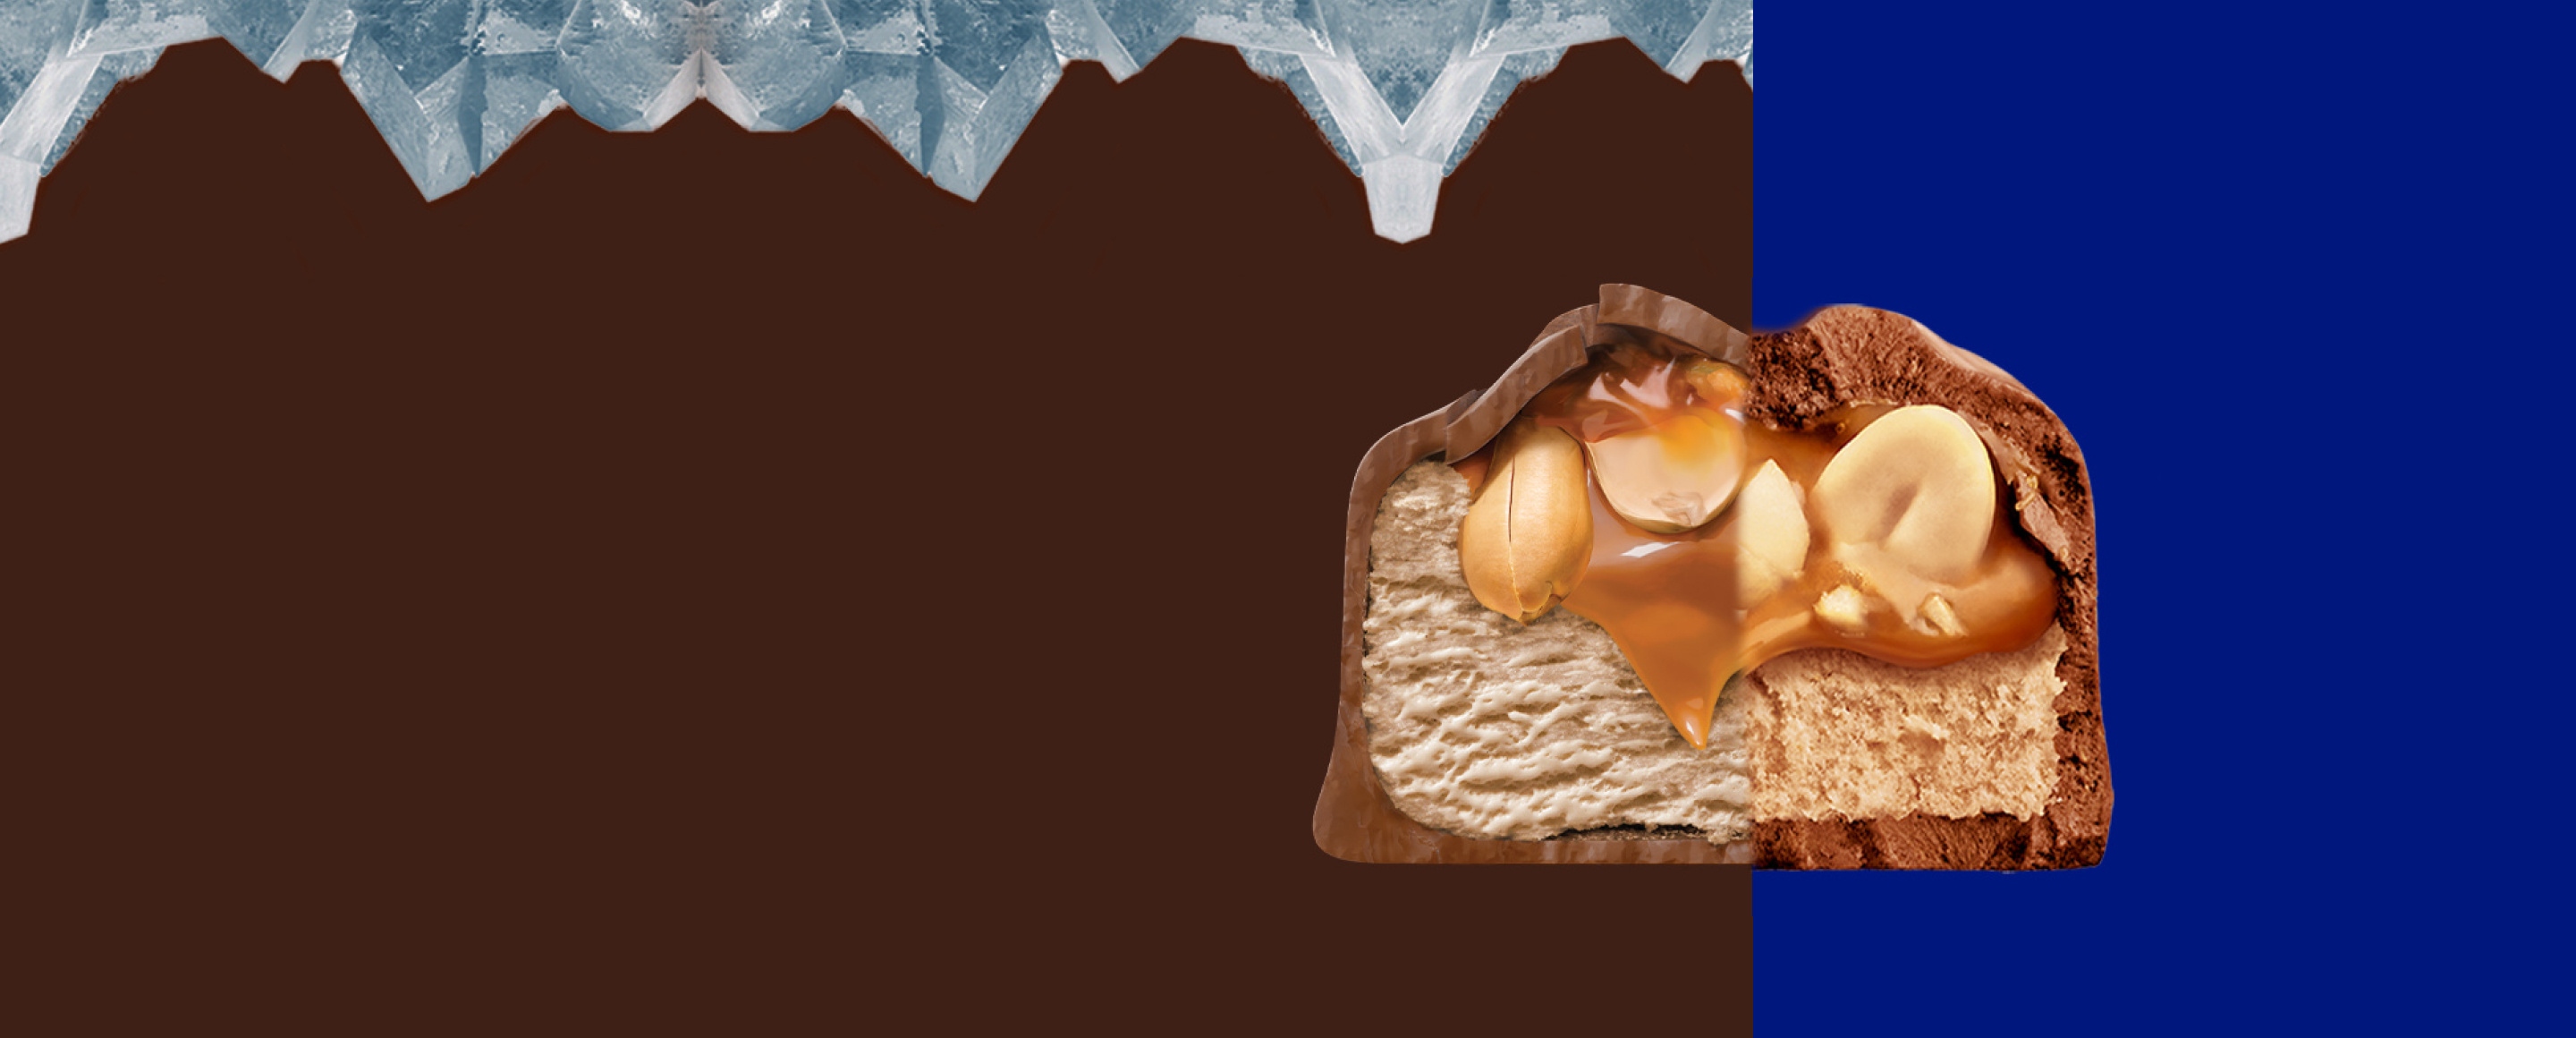 Split image of Snickers Ice cream bar and Snickers classic chocolate bar